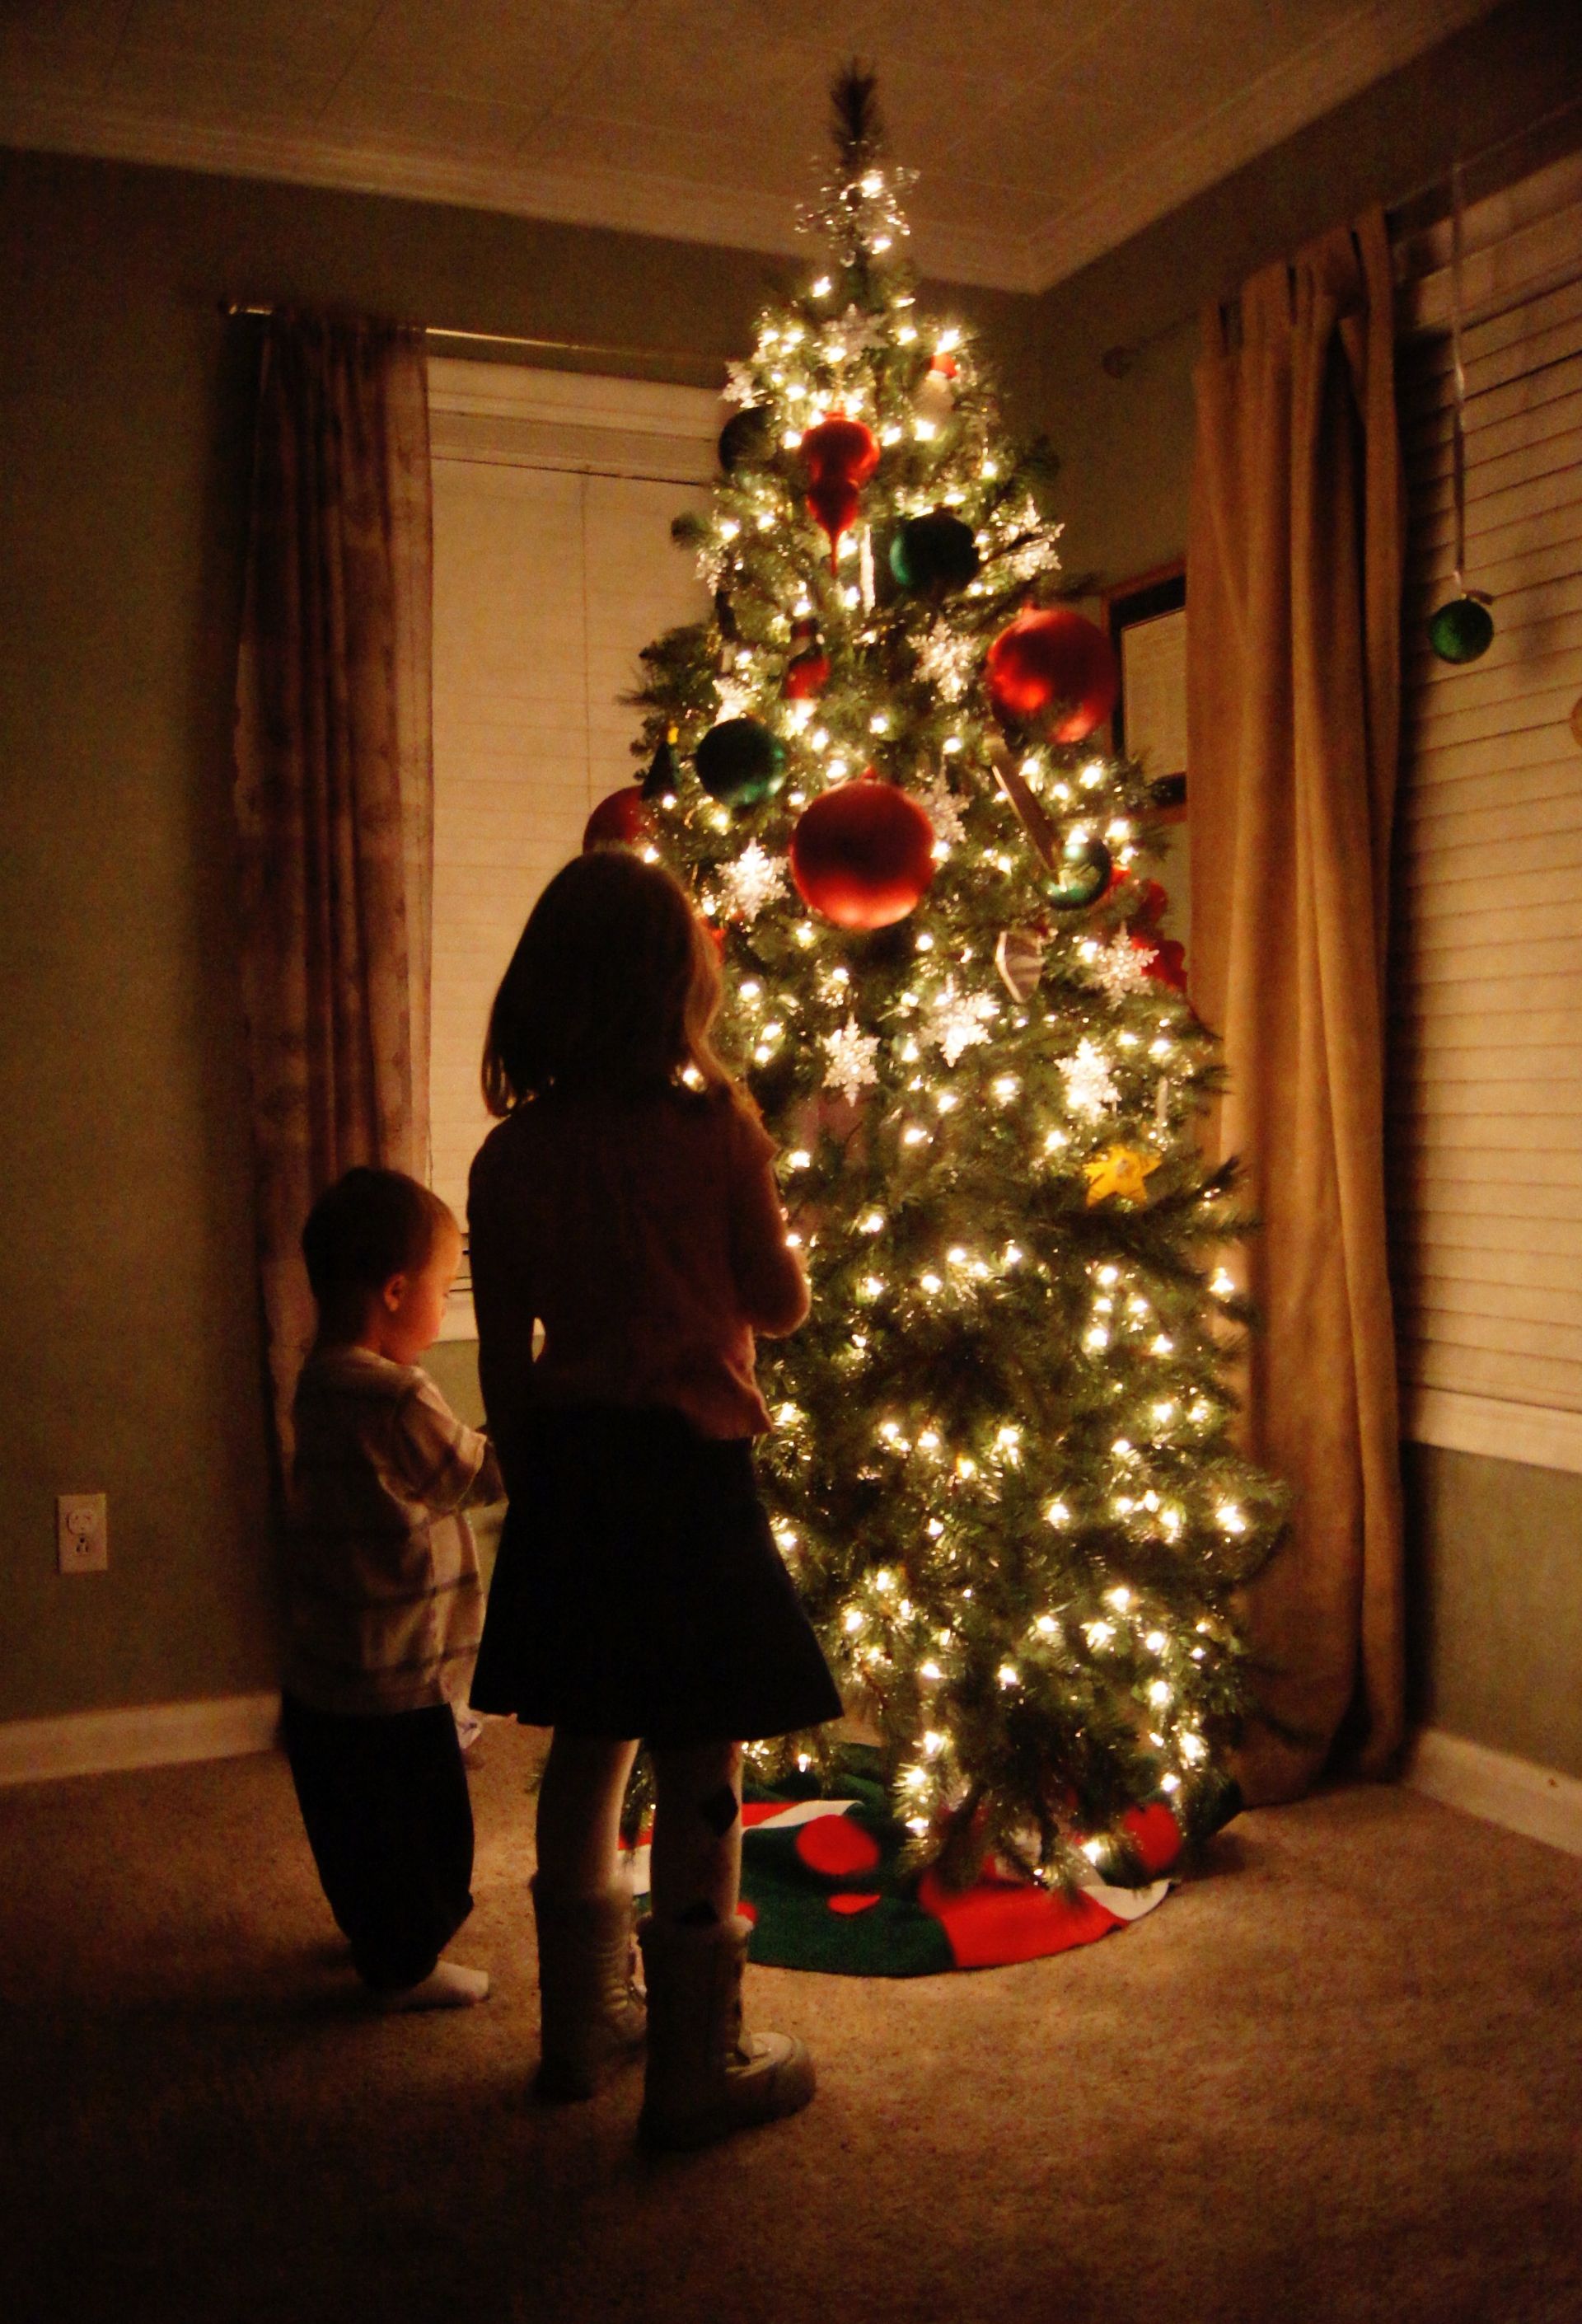 A tree lit up with children standing nearby.